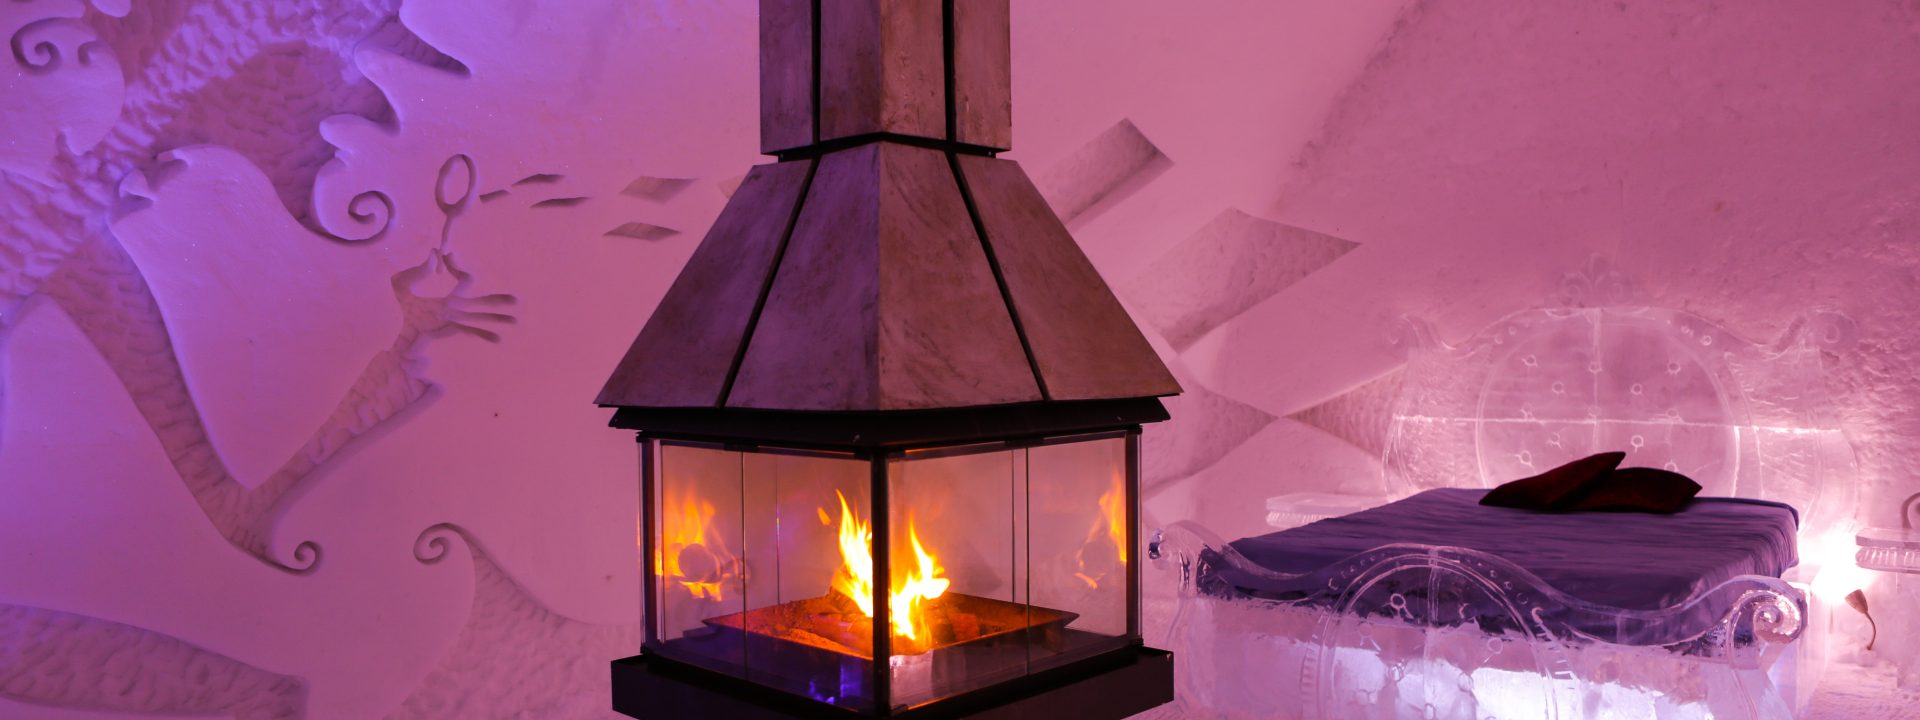 The Quebec Ice Hotel sparkles again